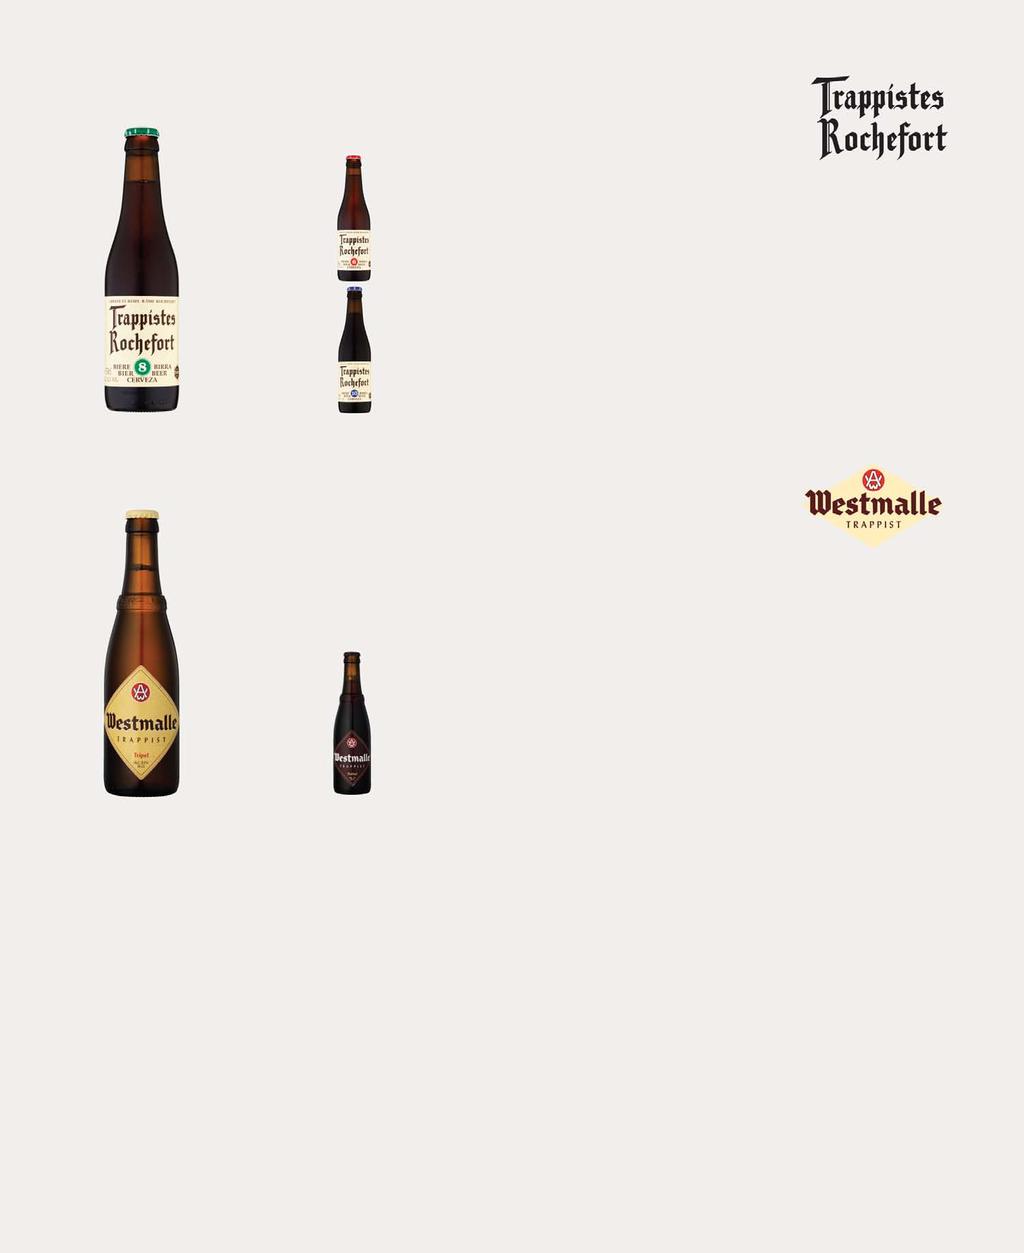 ROCHEFORT TRAPPIST BEER WESTMALLE Trappistes Rochefort is brewed and bottled within the walls of the Abbey of Saint-Remy, a small monastery of less than twenty monks.